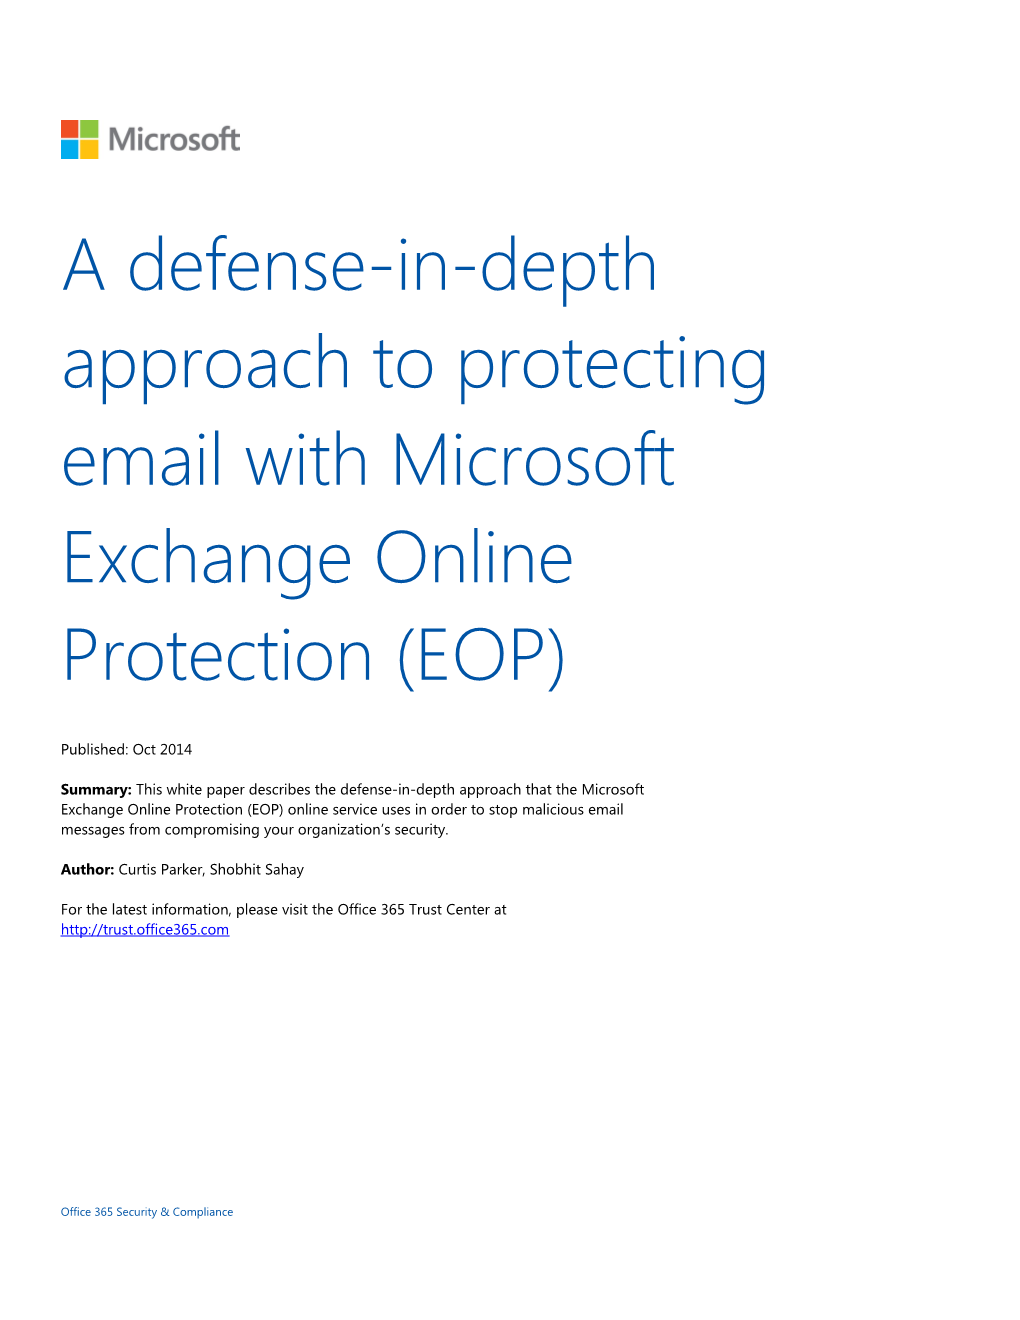 A Defense-In-Depth Approach to Protecting Email with Microsoft Exchange Online Protection (EOP)